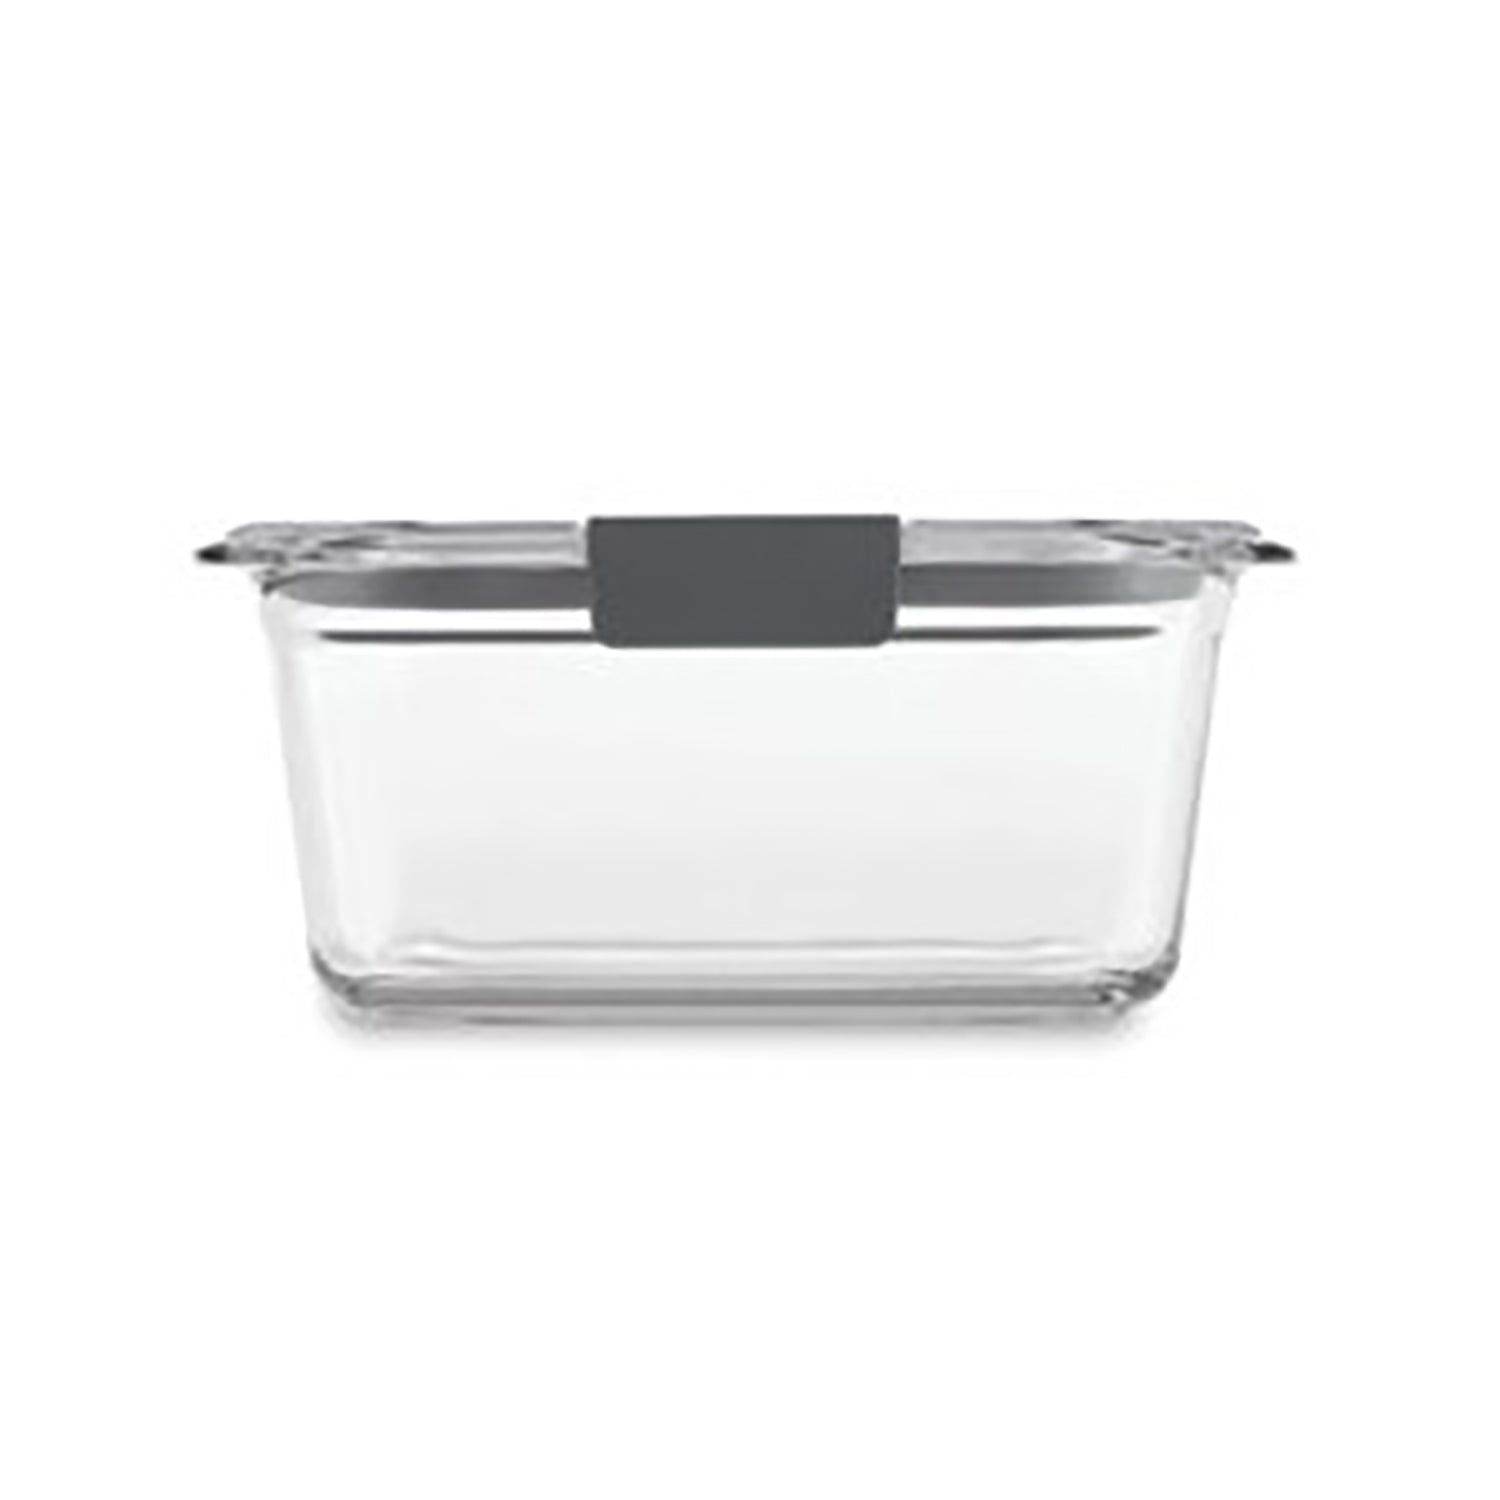 Rubbermaid Brillance Food Storage Container 3.2 Cup 2 Pk., Food Storage, Household